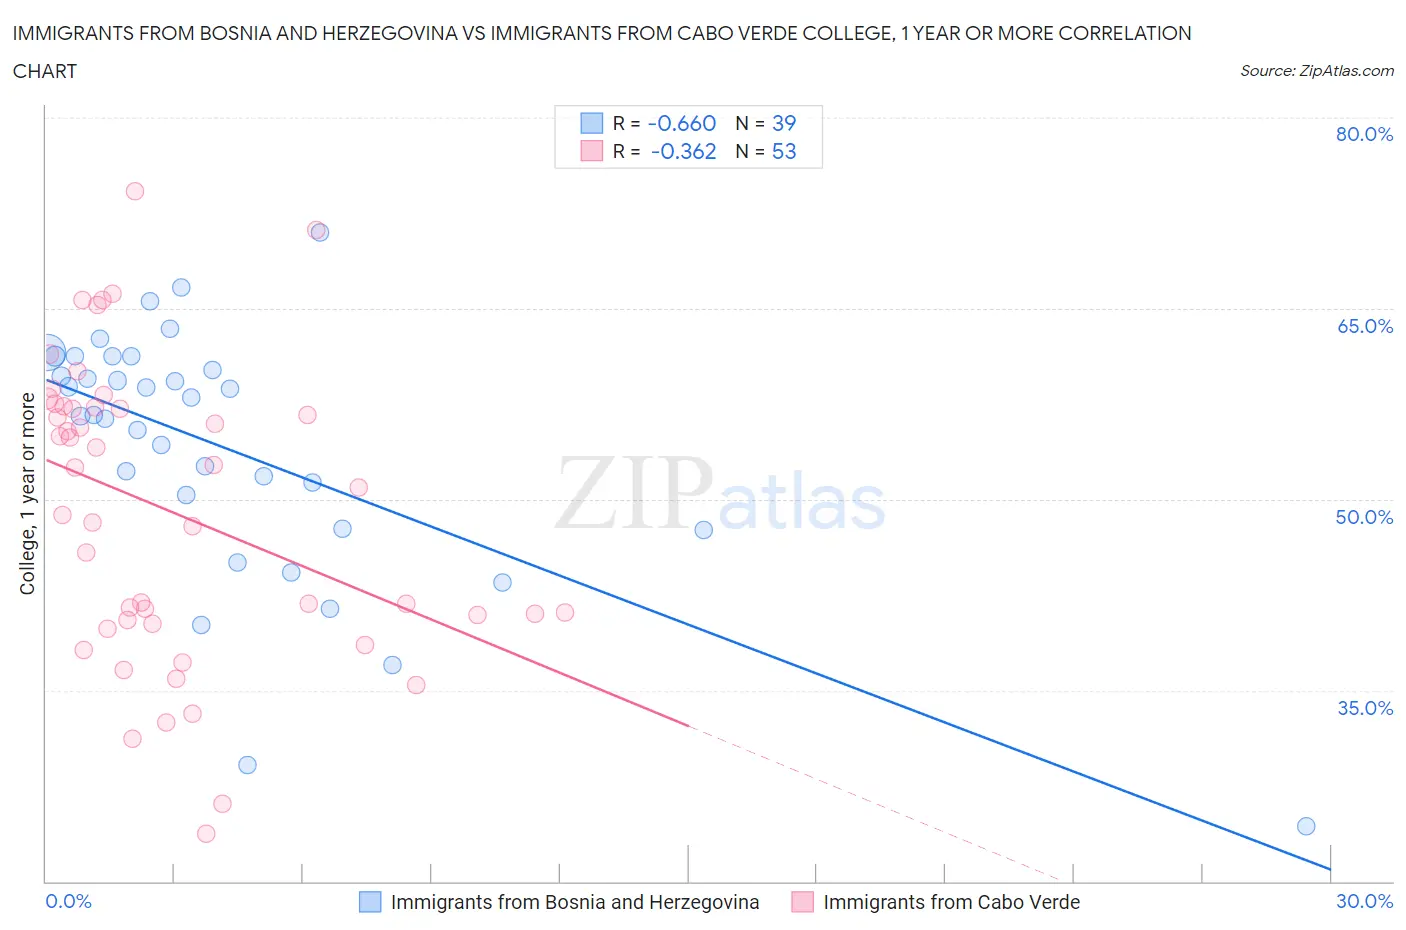 Immigrants from Bosnia and Herzegovina vs Immigrants from Cabo Verde College, 1 year or more